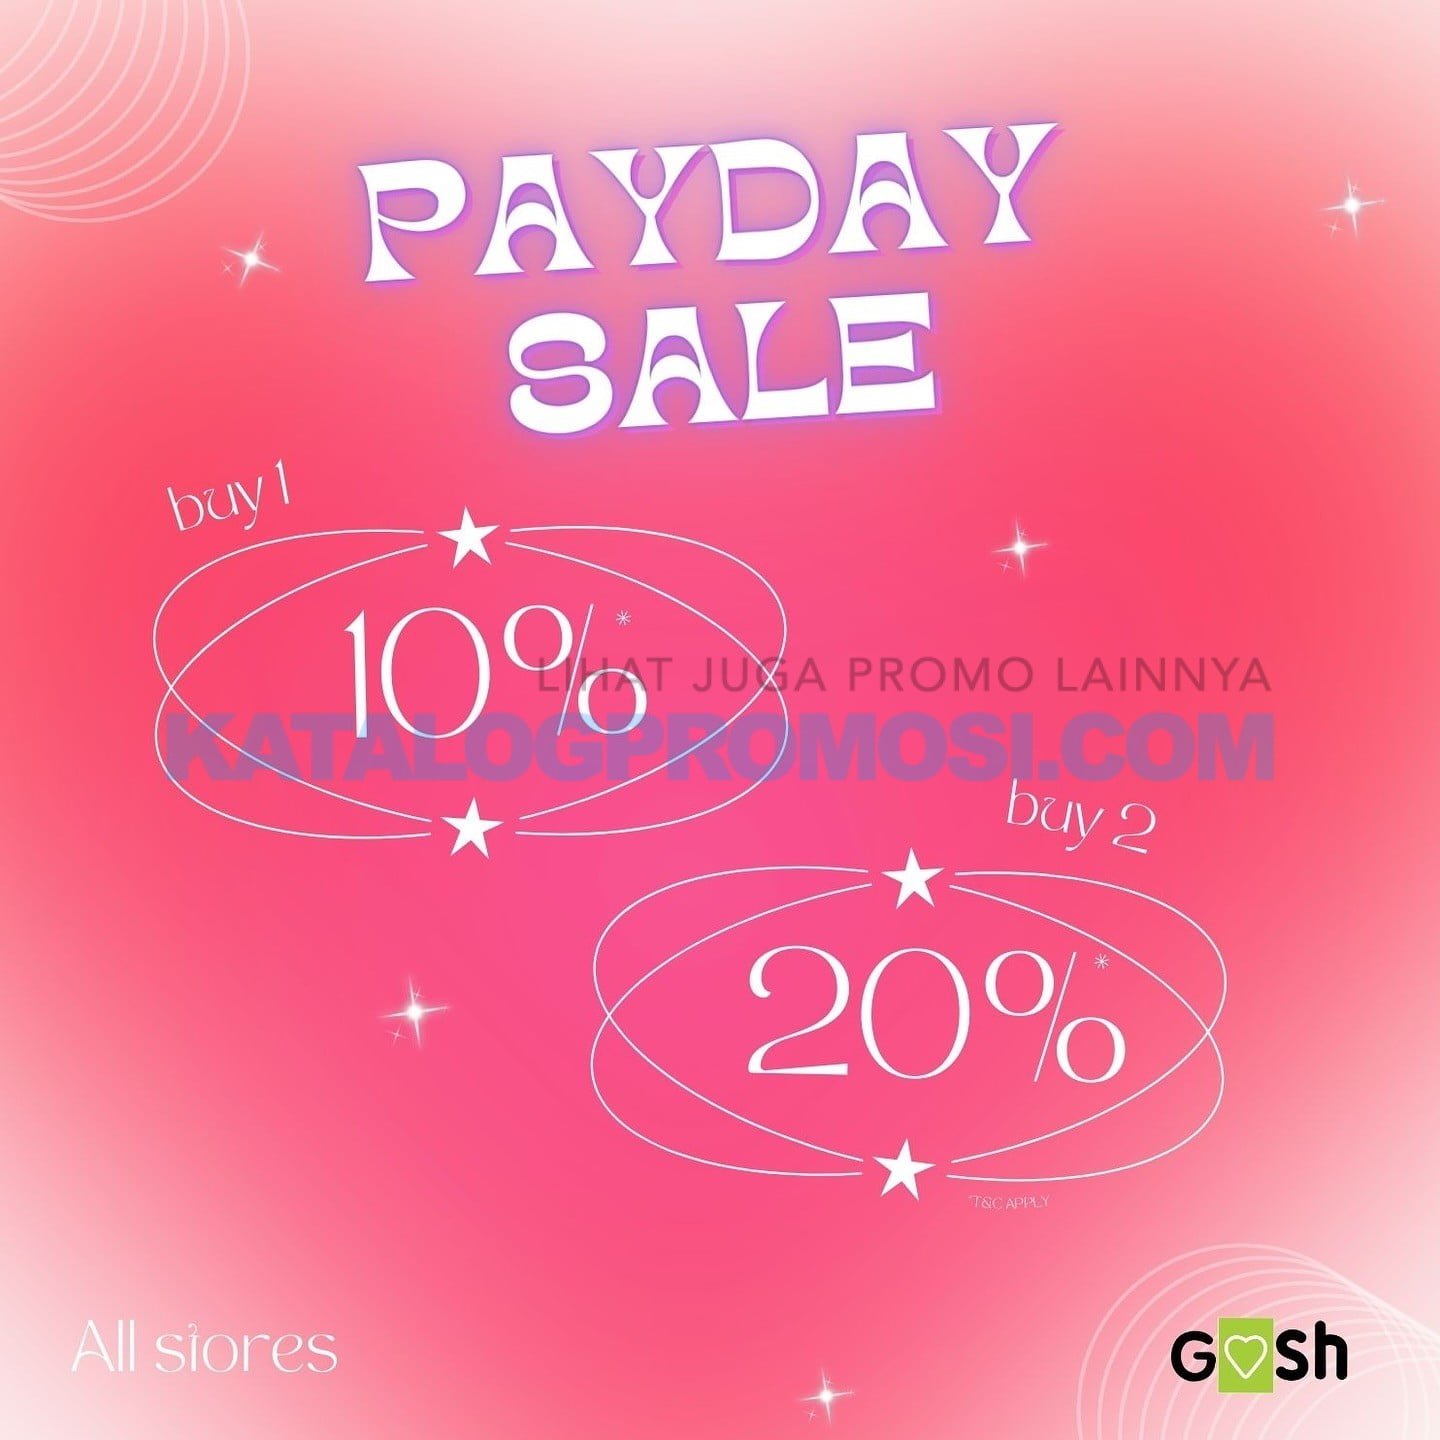 Promo GOSH SHOES PAYDAY SALE - DISCOUNT up to 20% off